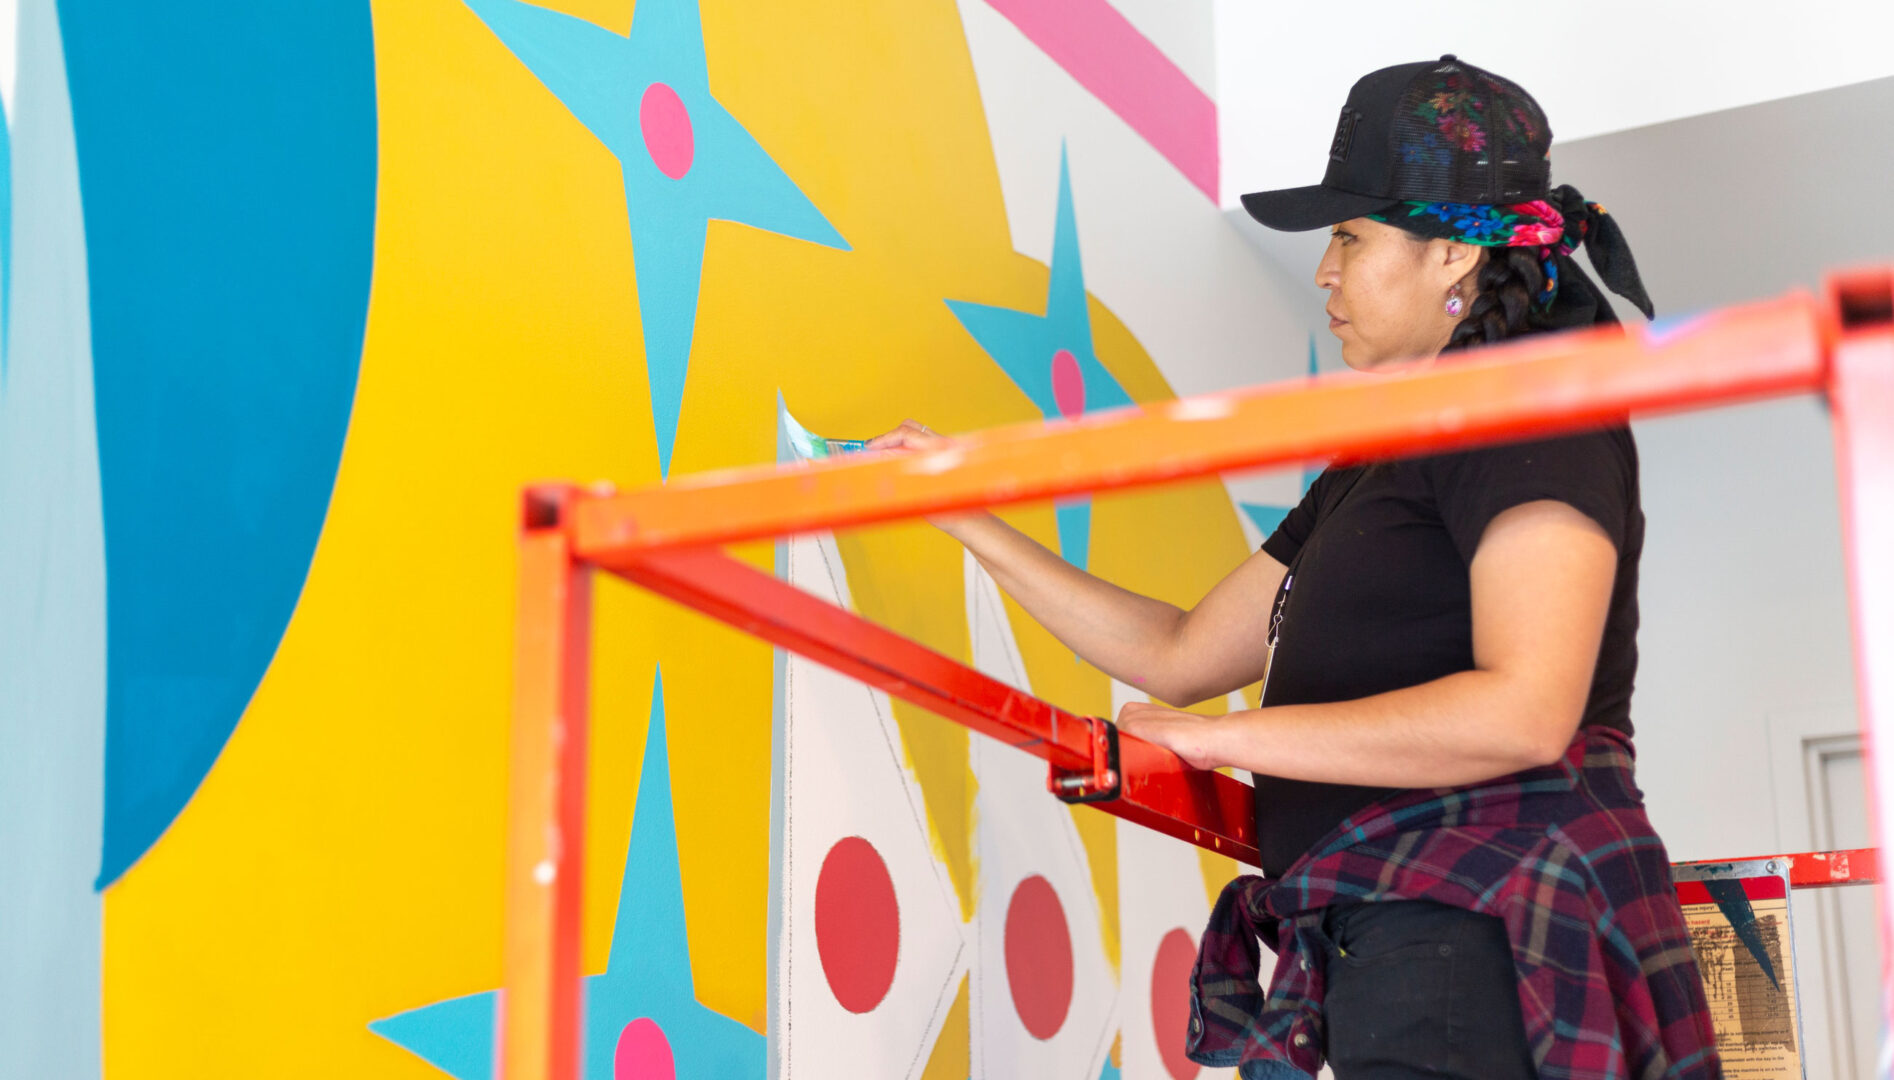 Artist Lynnette Haozous working on the mural “Into the Sun,” 2021